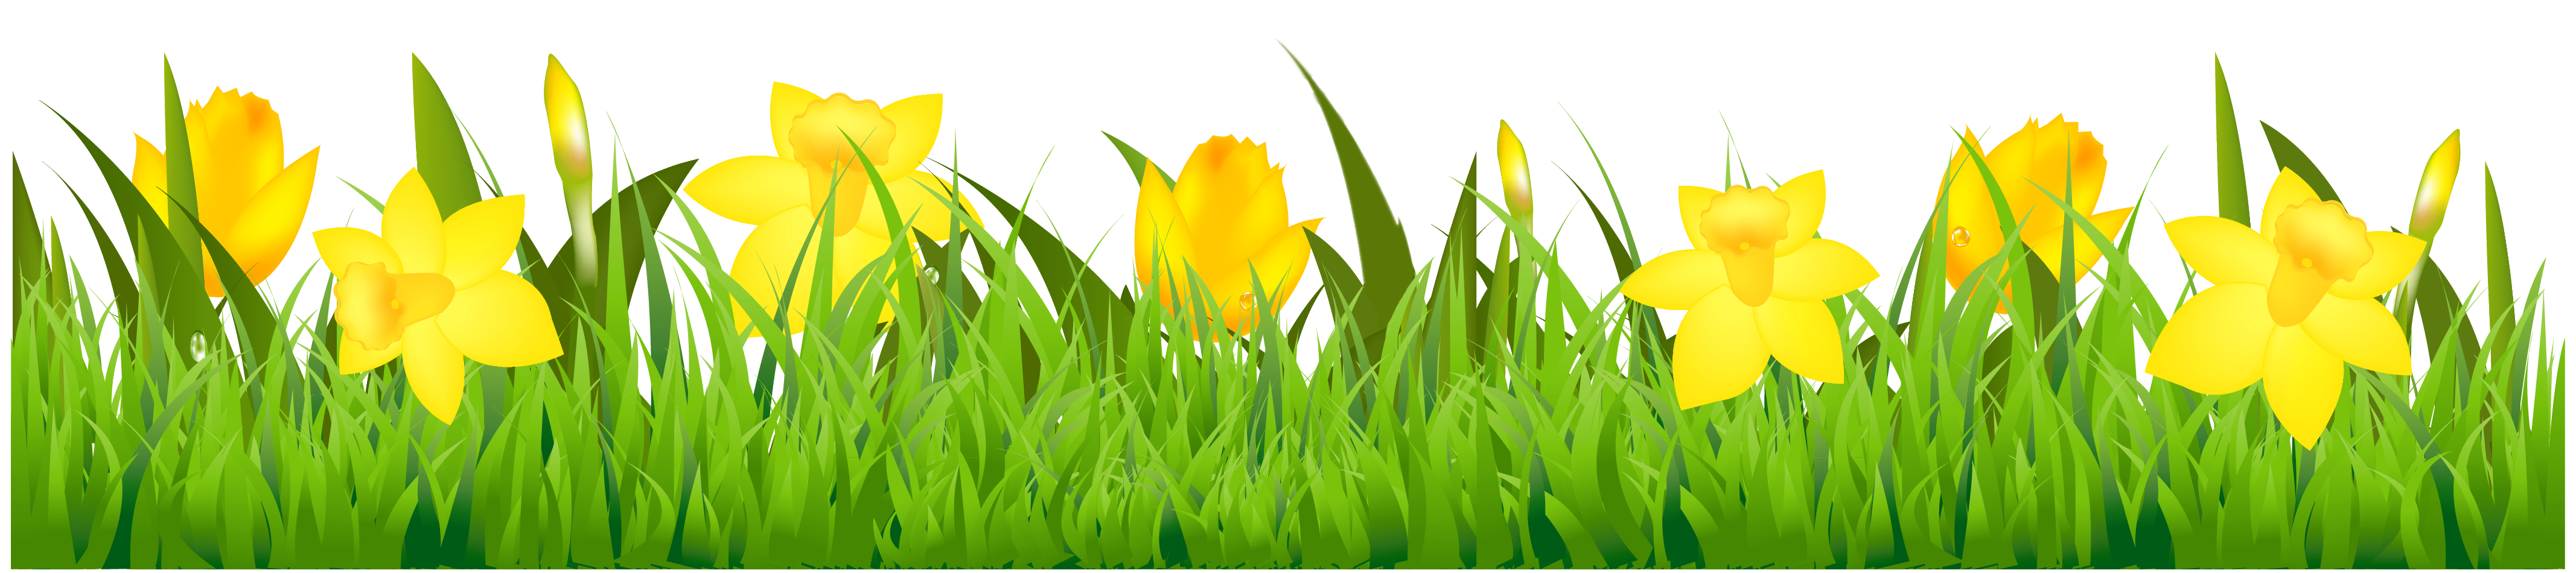 Download PNG image - Yellow Daffodil PNG Free Download 